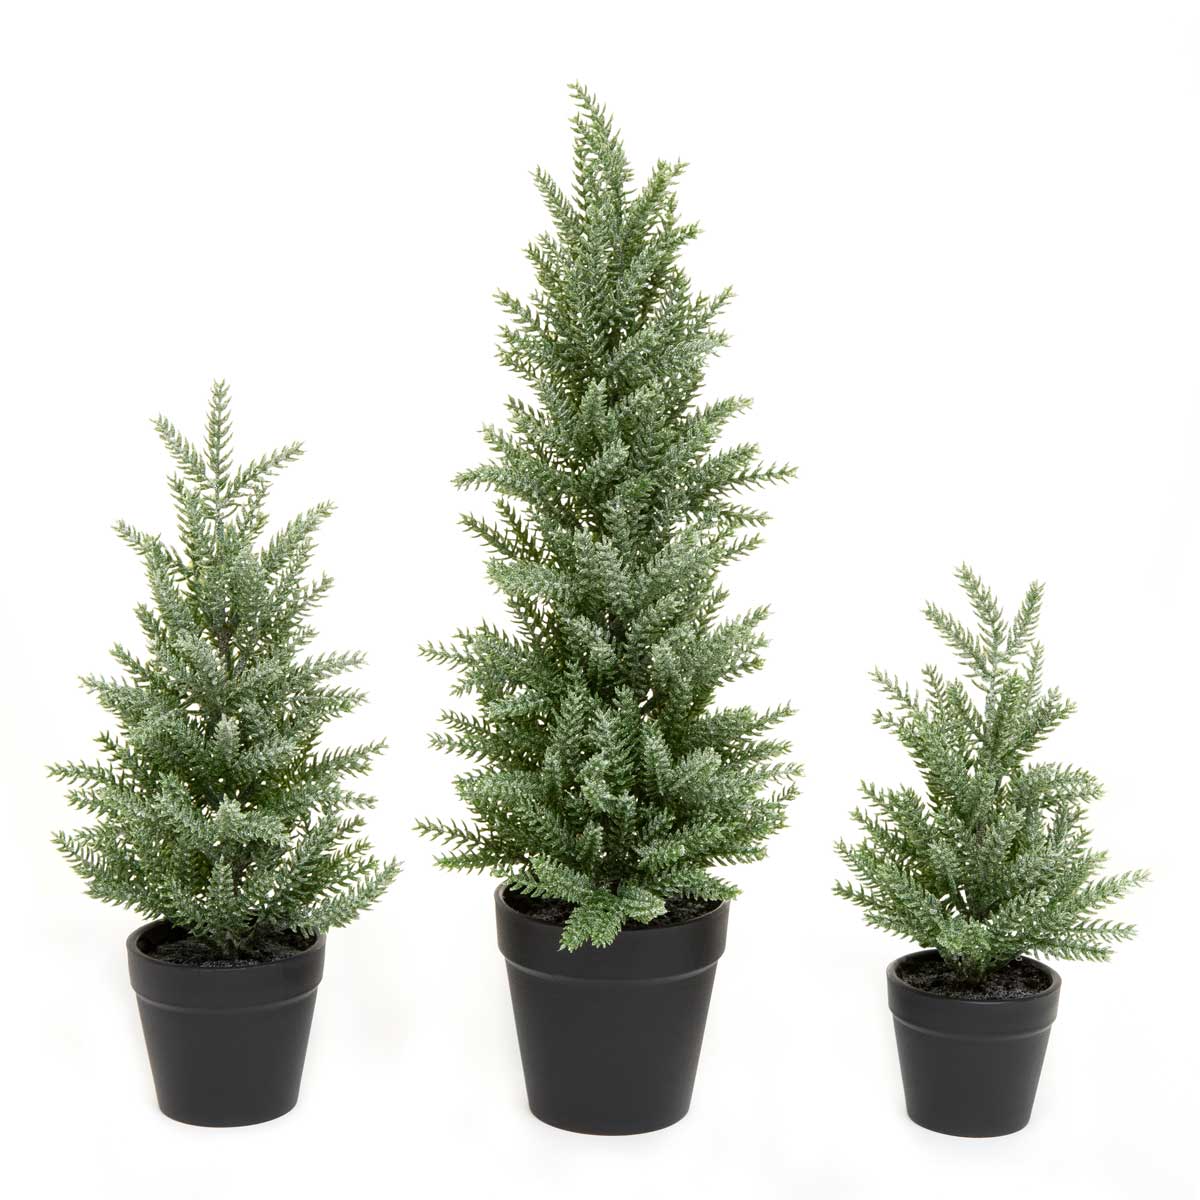 TREE PINE FROSTED SMALL 5IN X 9IN IN BLACK POT PLASTIC